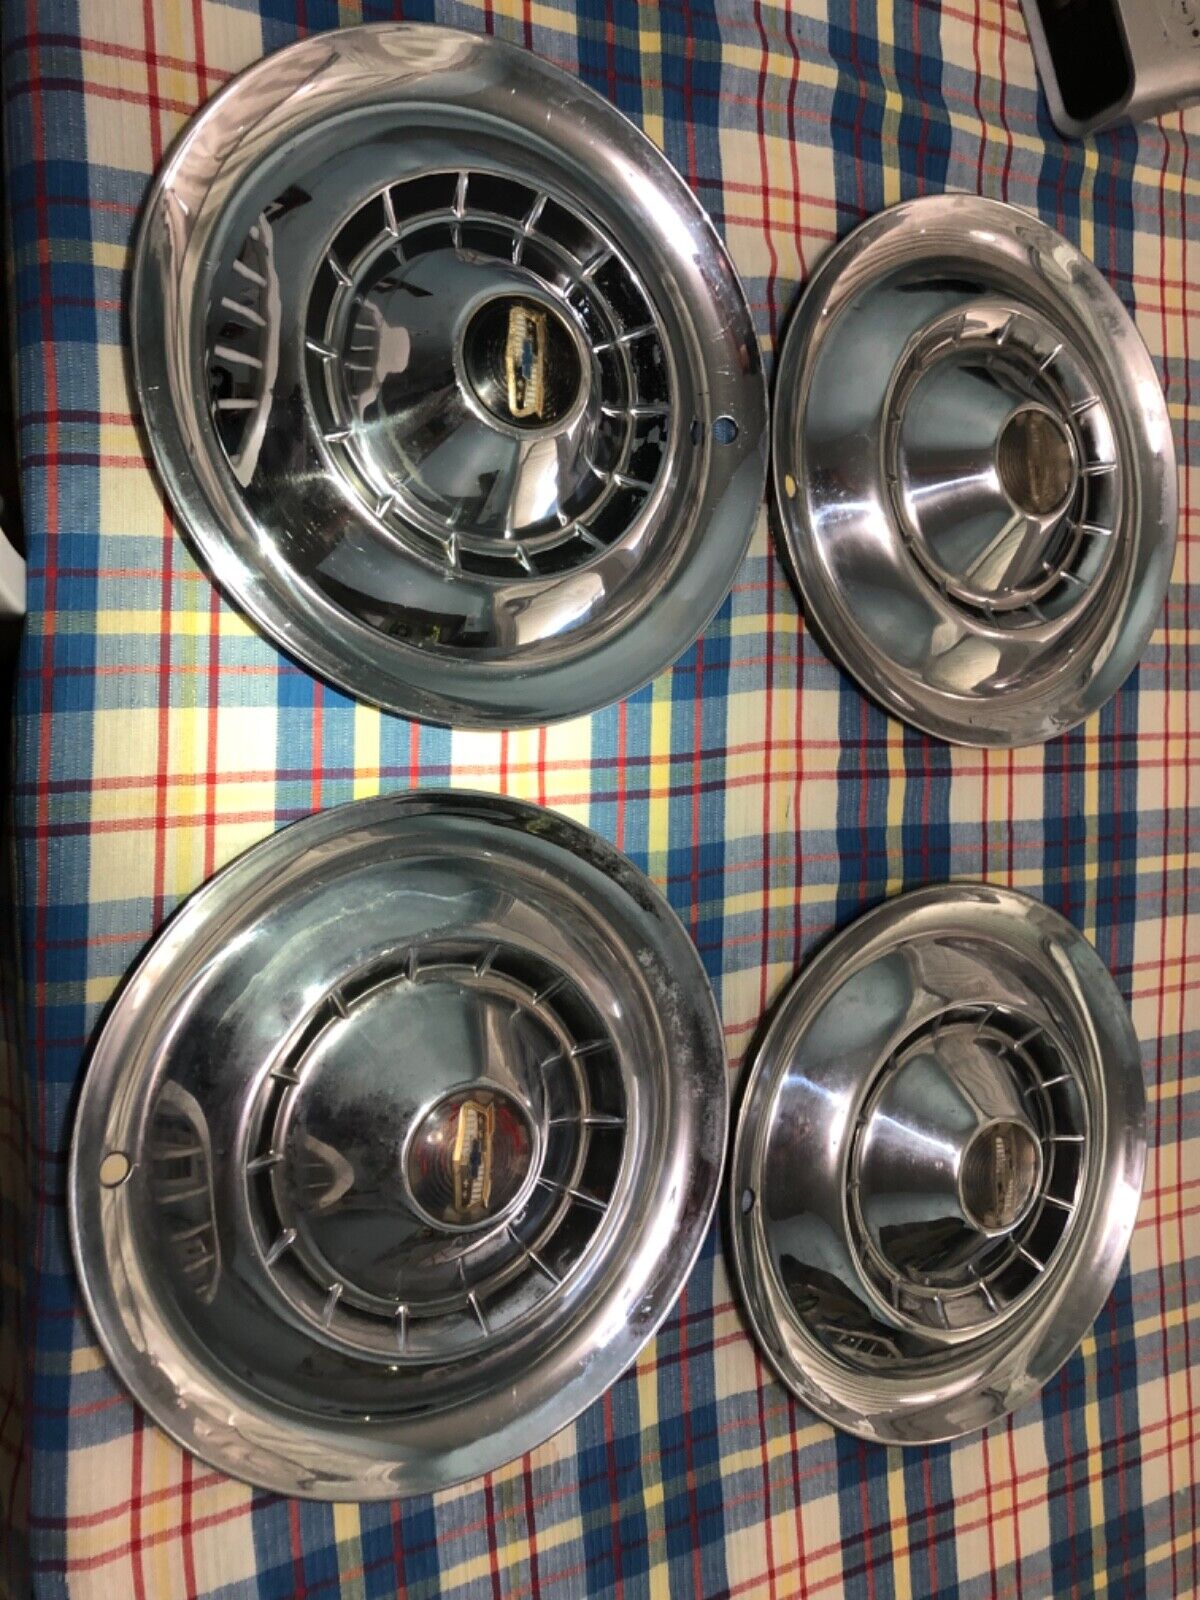 1954 CHEVROLET CHEVY NOMAD BEL AIR BISCAYNE DELRAY IMPALA  HUBCAPS WHEEL COVERS